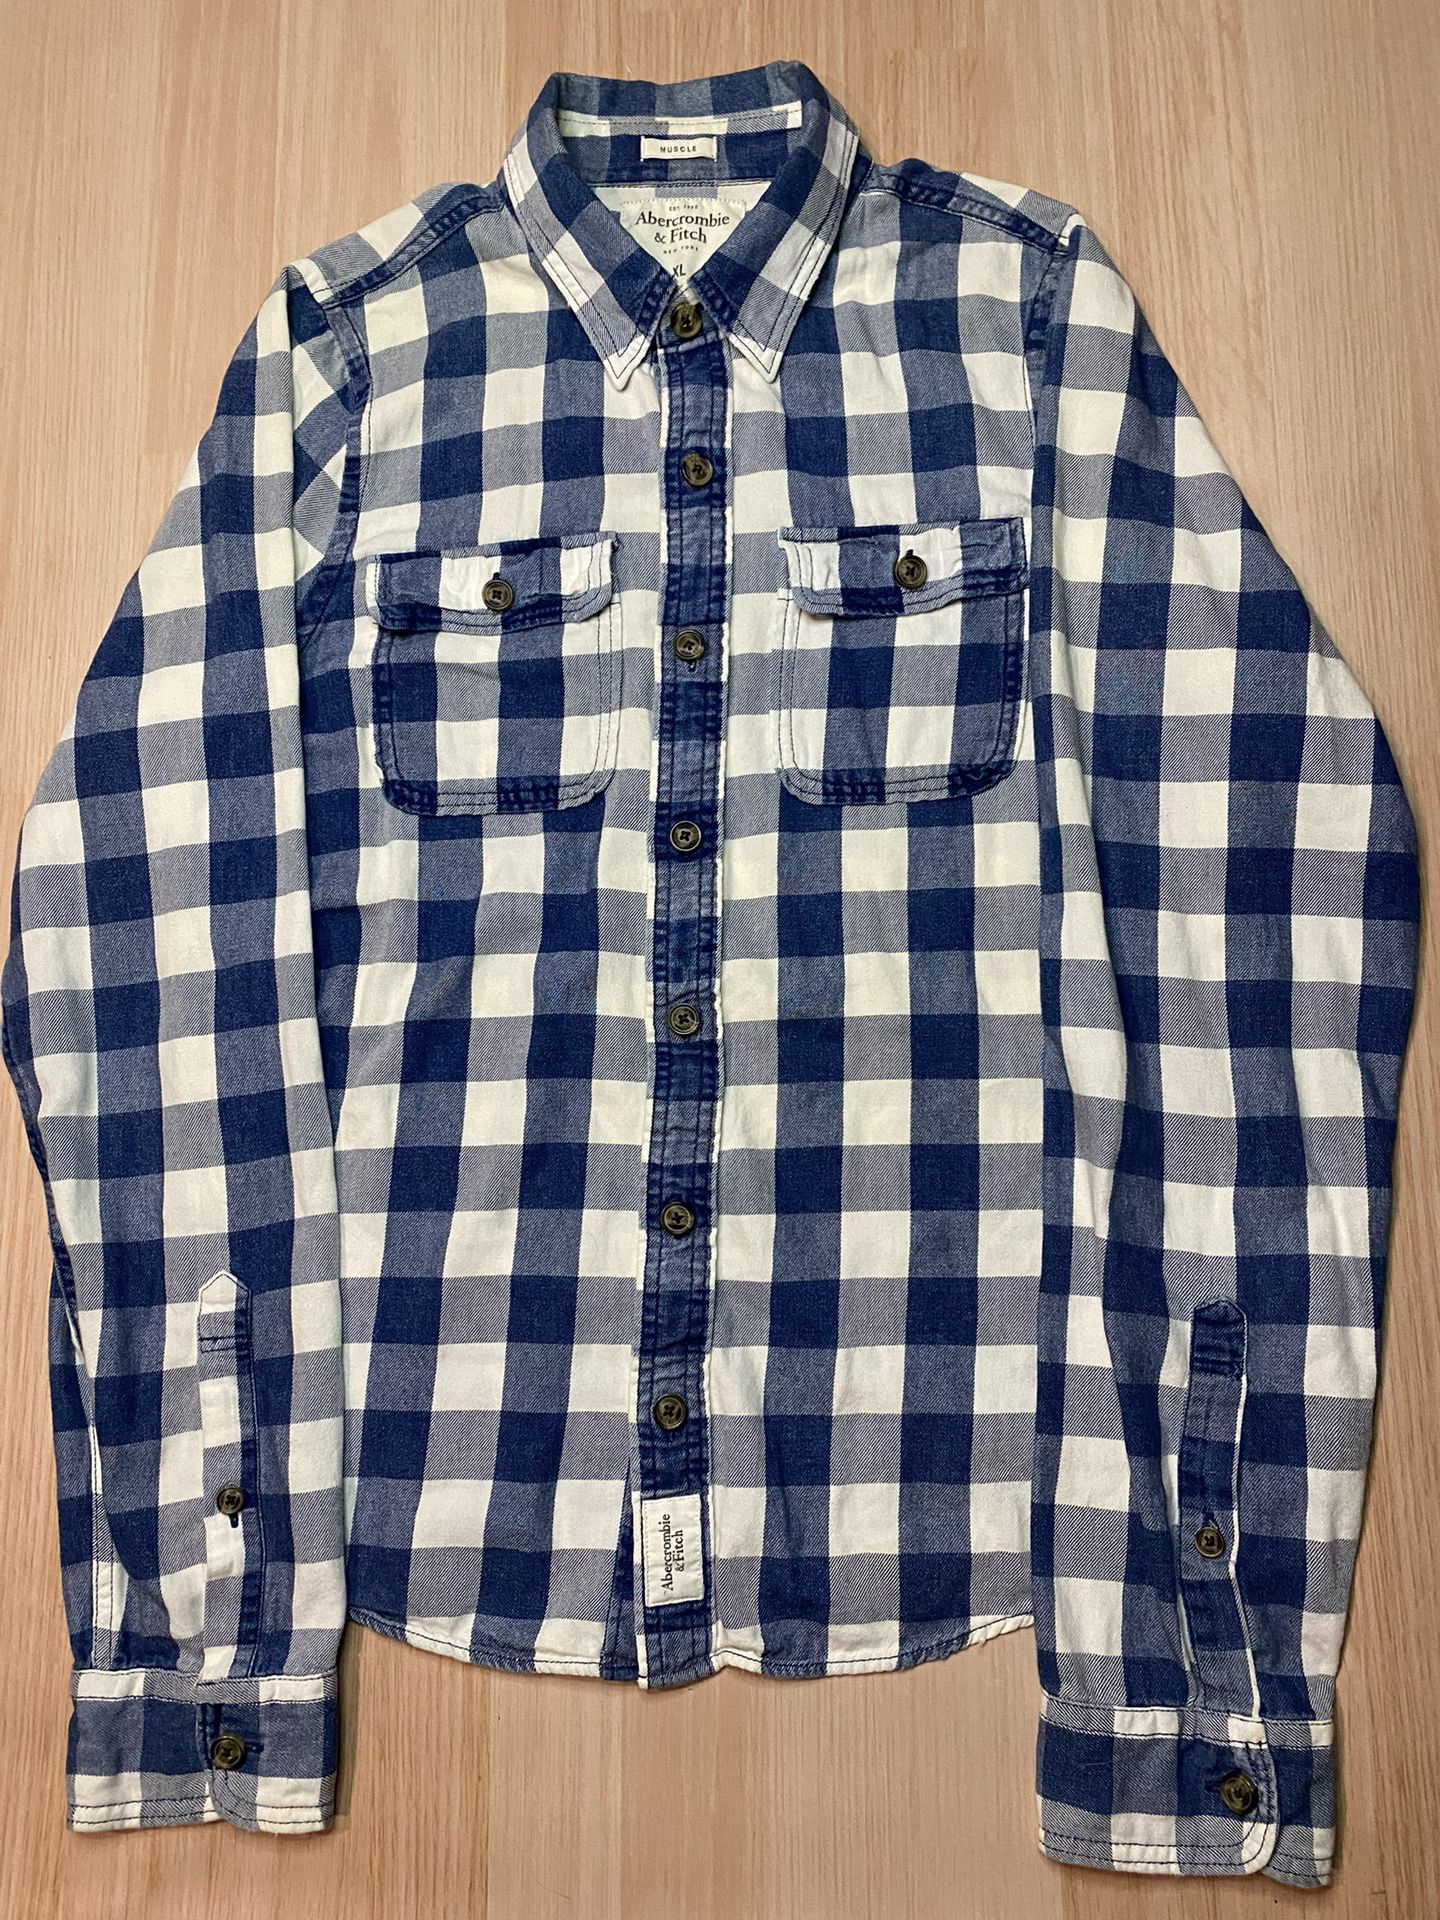 Abercrombie & Fitch A&F Sz  X Large Muscle Fit Blue/White Plaid Flannel Shirt